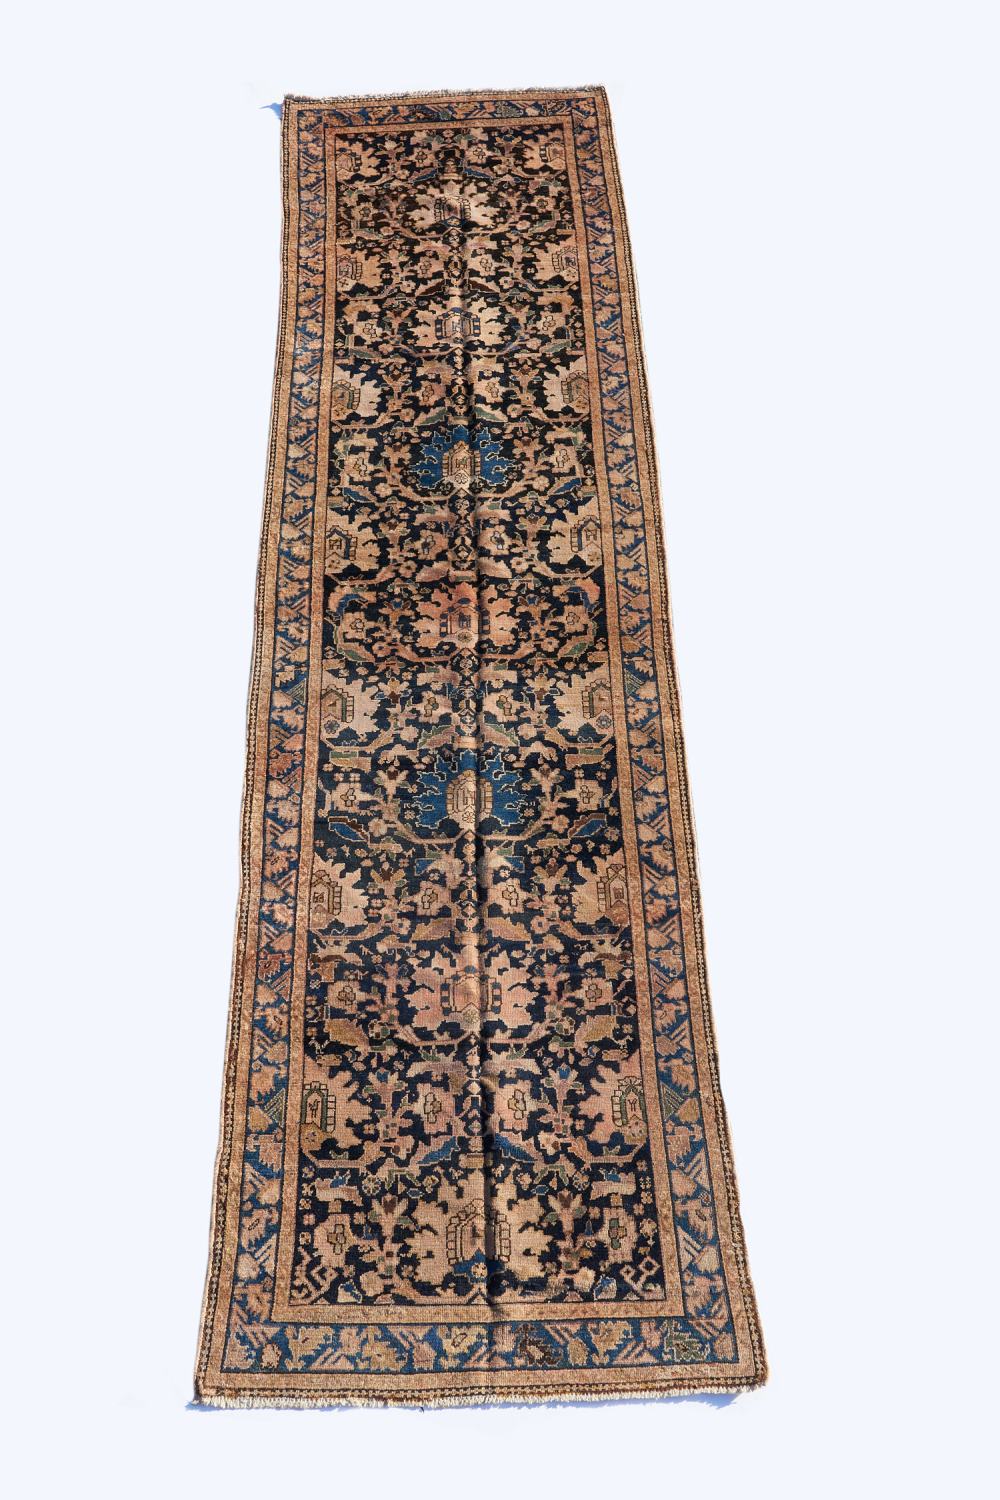 LARGE MALAYER RUNNER c.1900, West